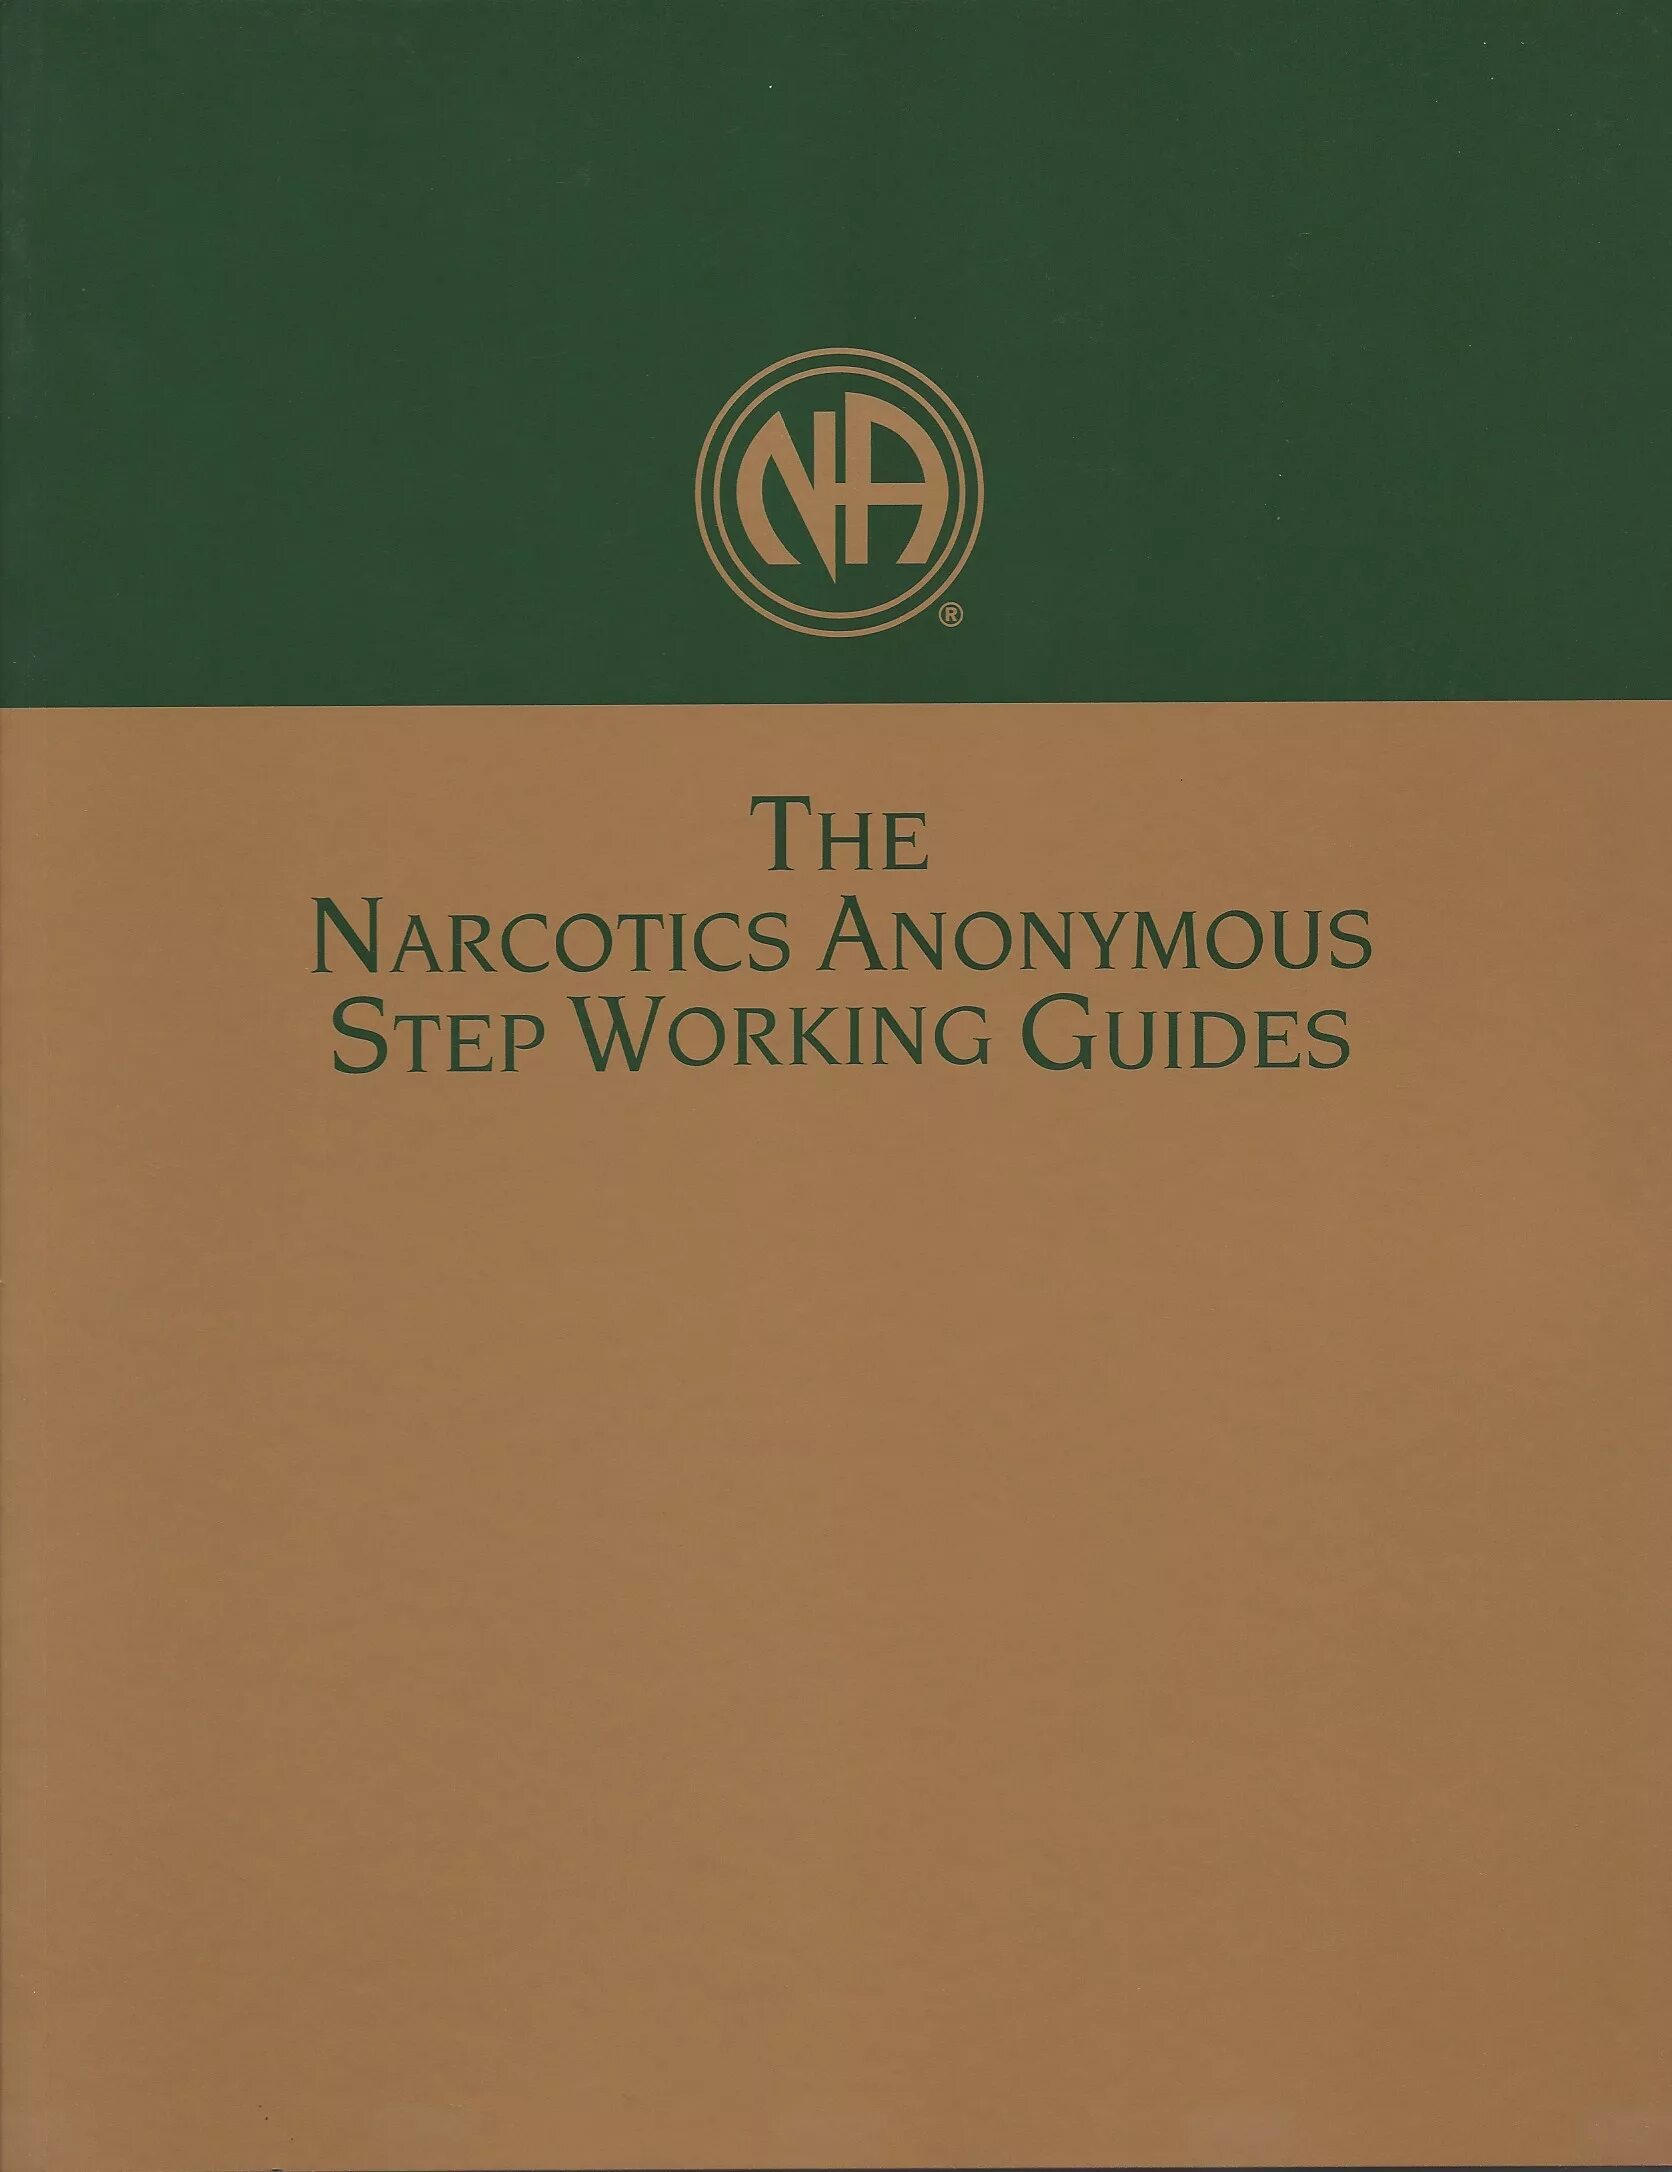 Step in working. Narcotics anonymous steps. Narcotics anonymous 12 Step. Narcotics anonymous Group. США литература Narcotics anonymous.